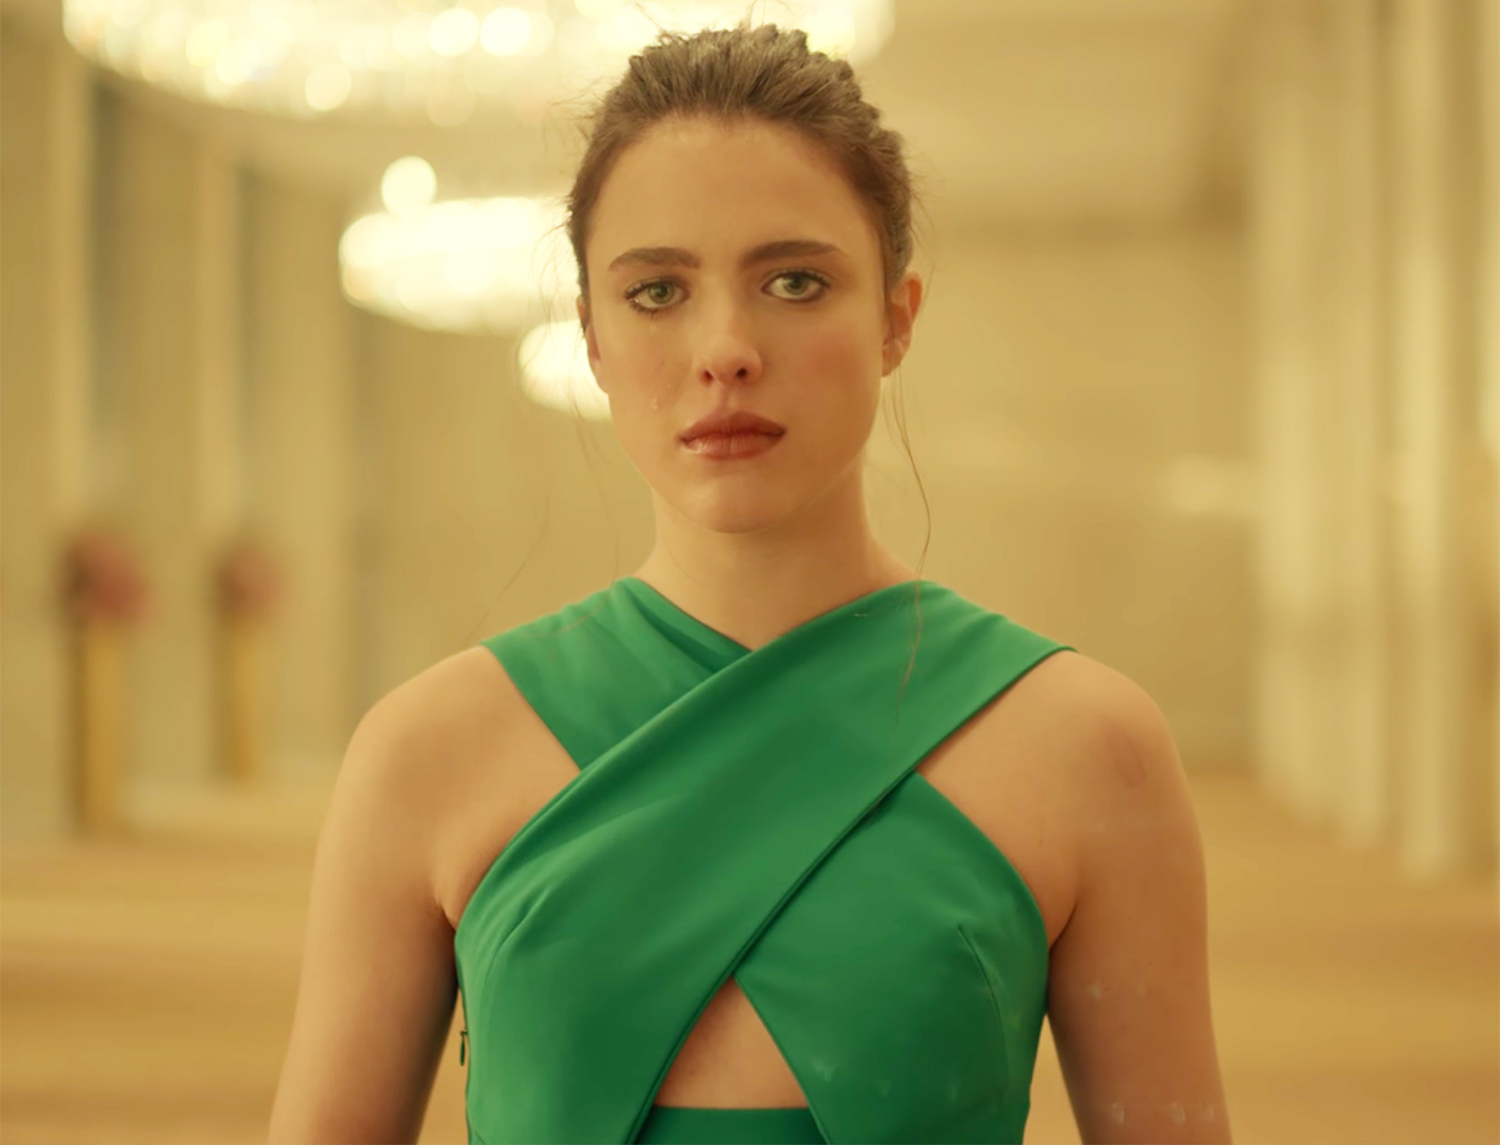 Kenzo, Margaret Qualley Reinvent the 